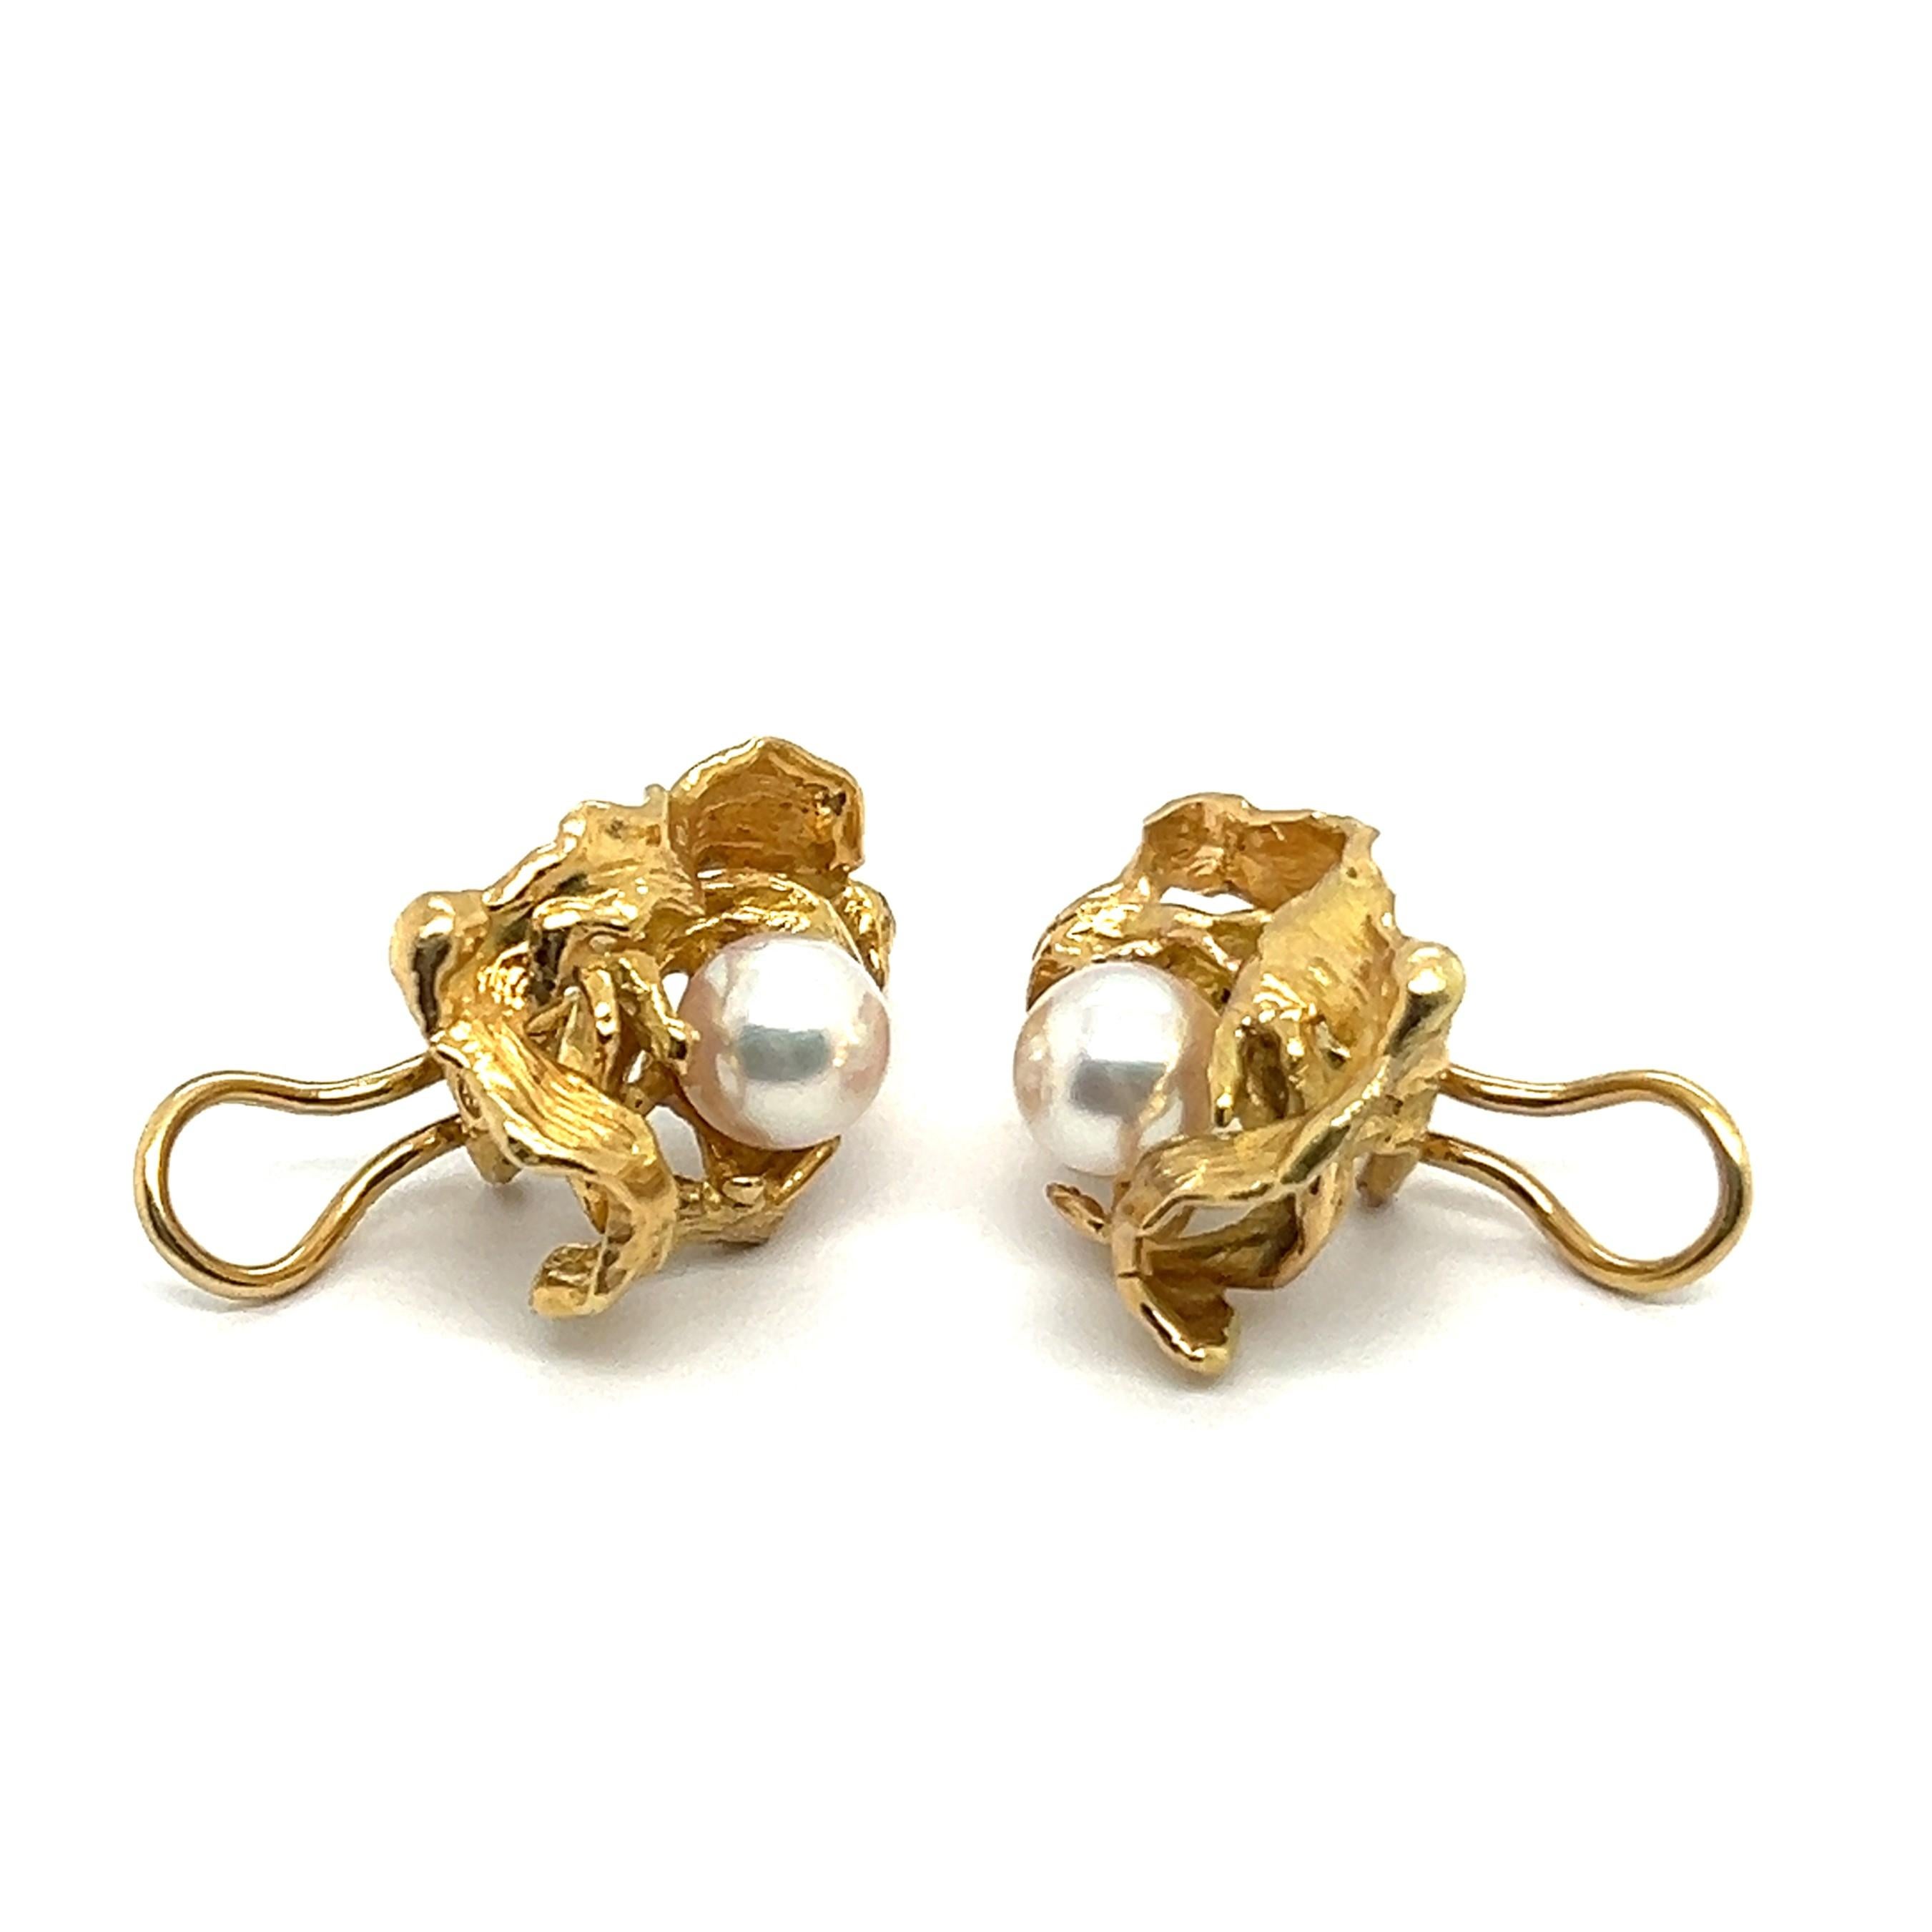 Round Cut Sculptural Earrings with Akoya Pearls in 18 Karat Yellow Gold by Gilbert Albert For Sale